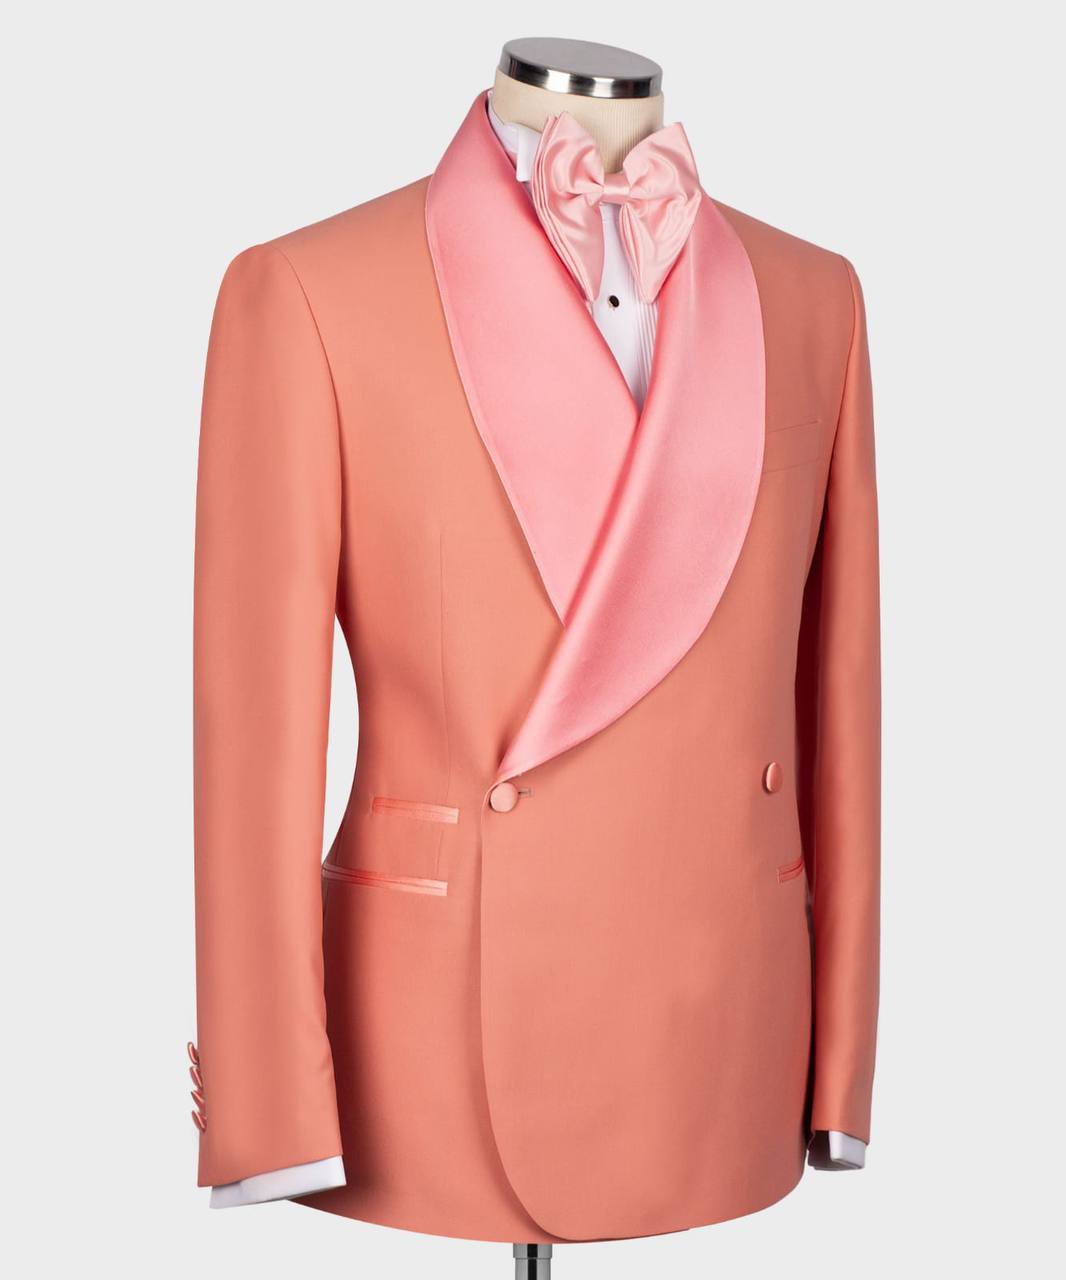 Men's Suit -2 Piece Double Breasted -Pink